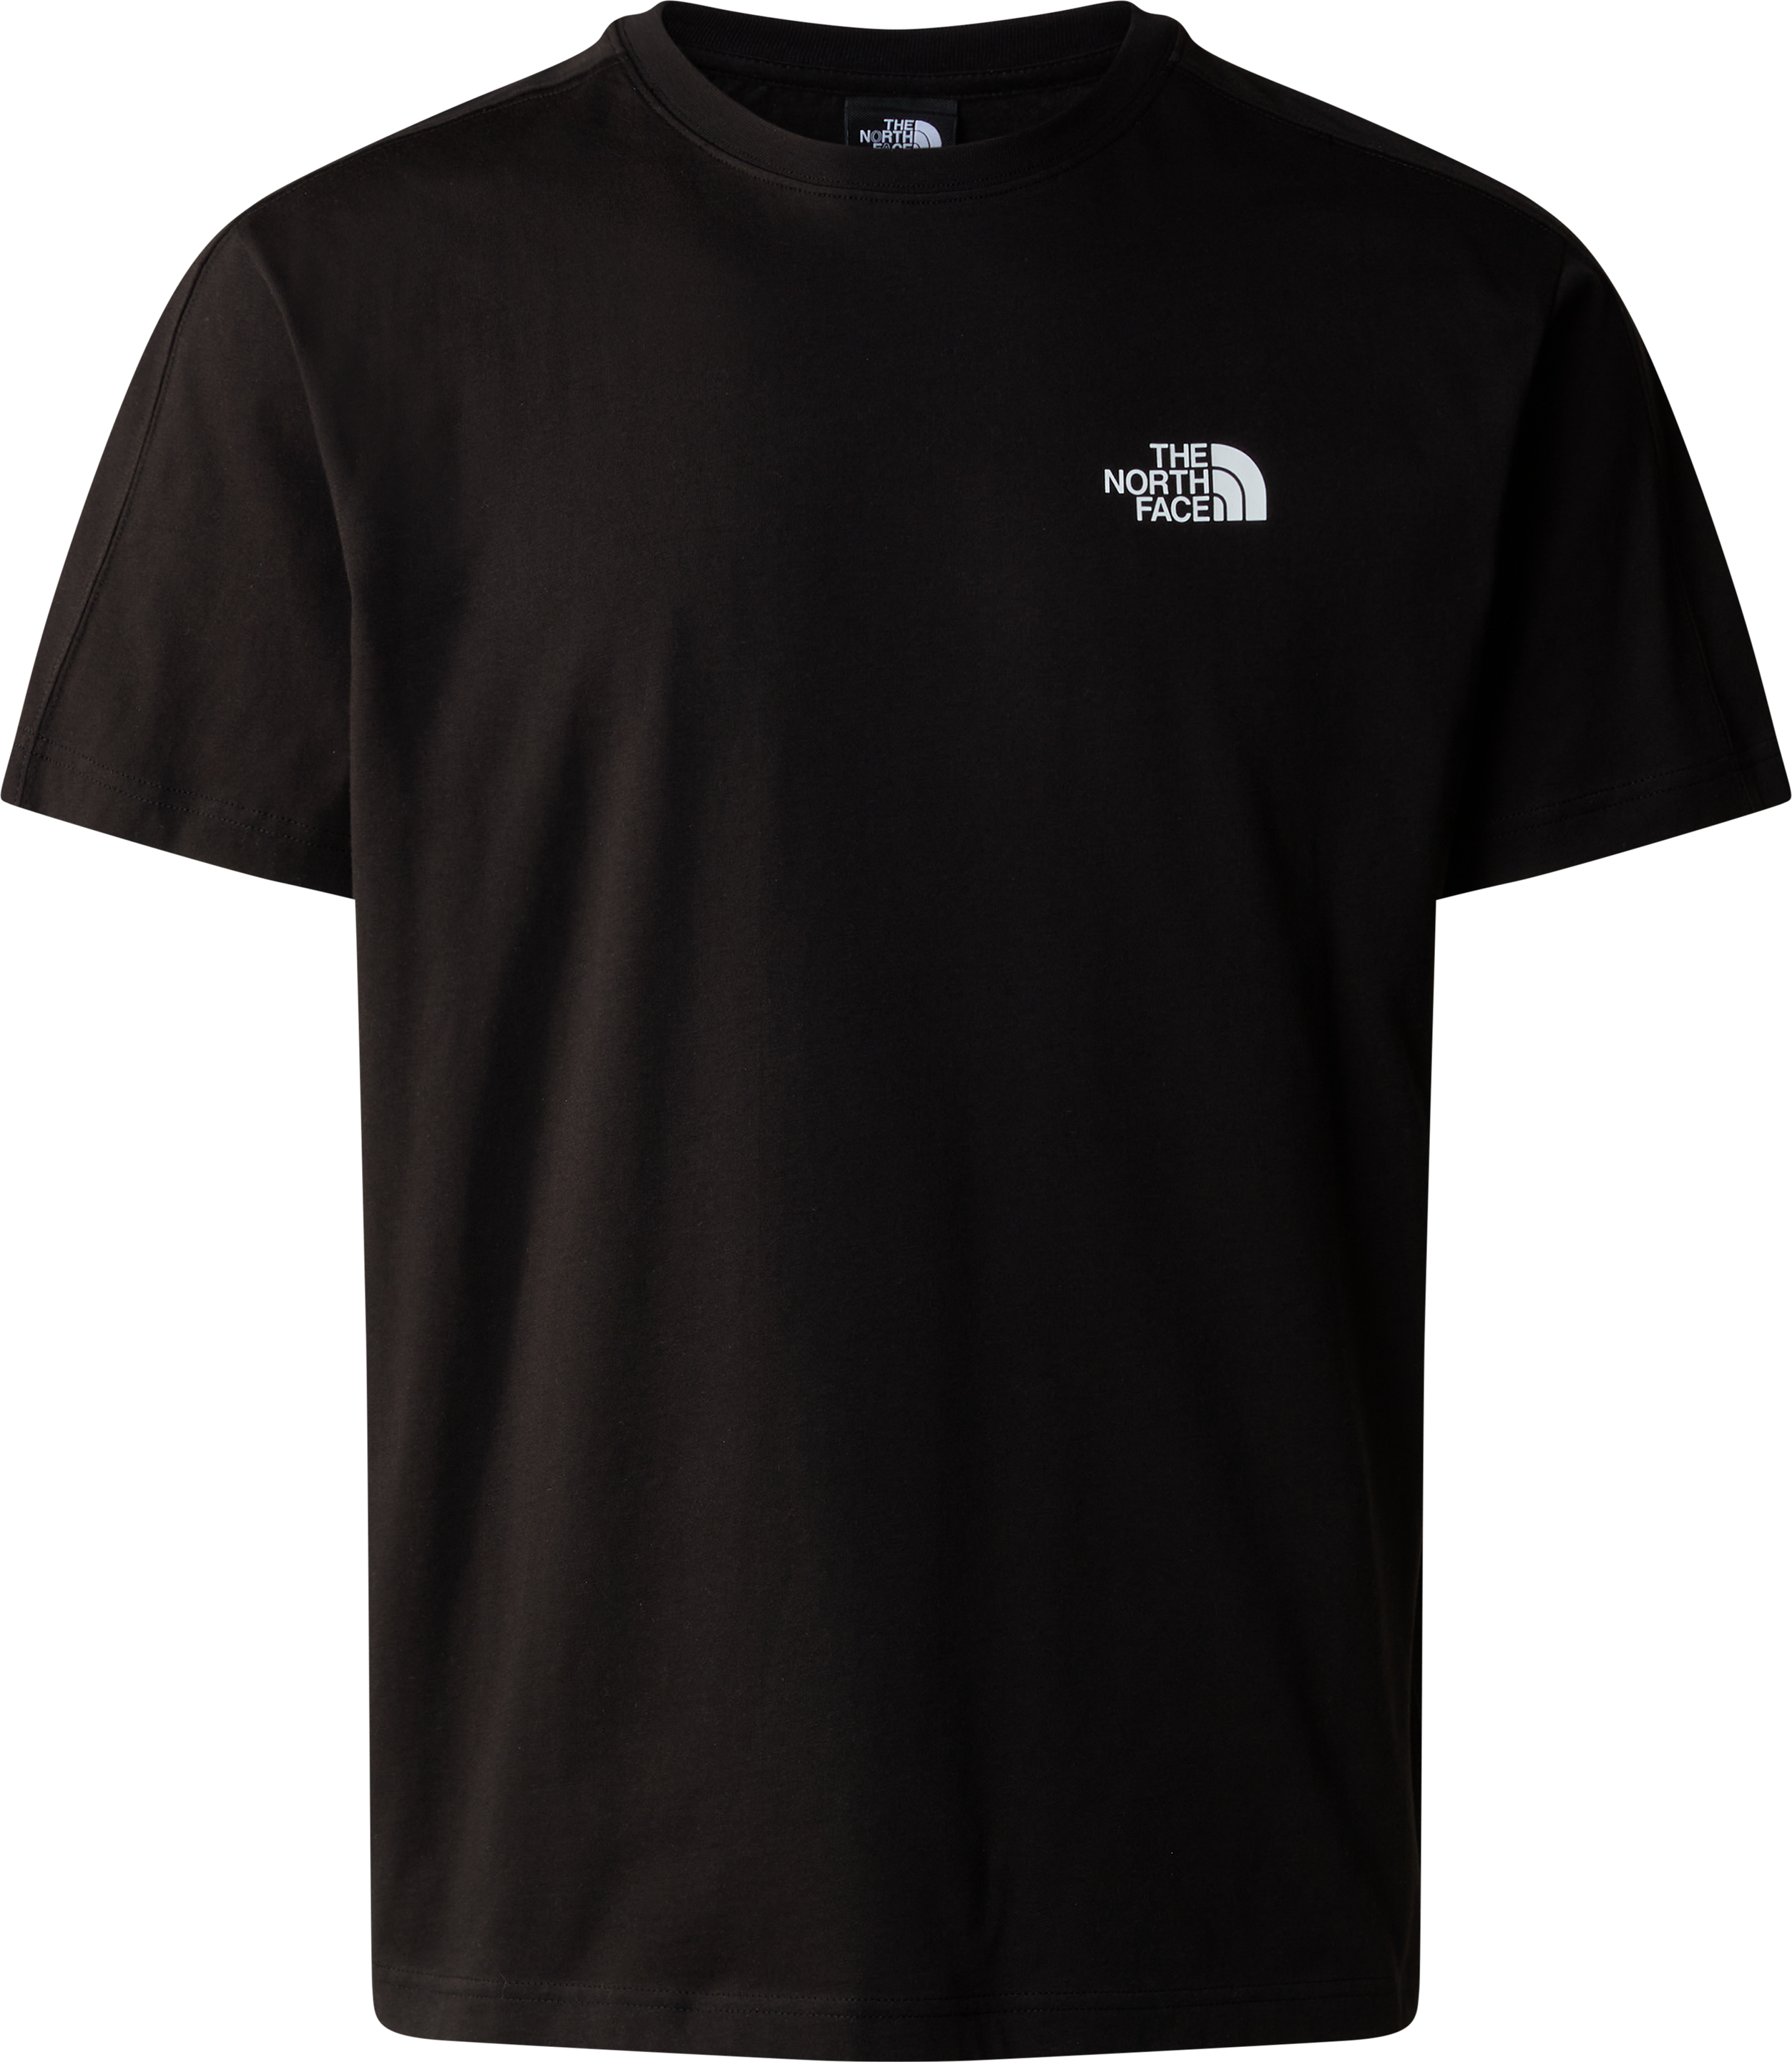 The North Face The North Face Men's Outdoor T-Shirt Tnf Black L, Tnf Black